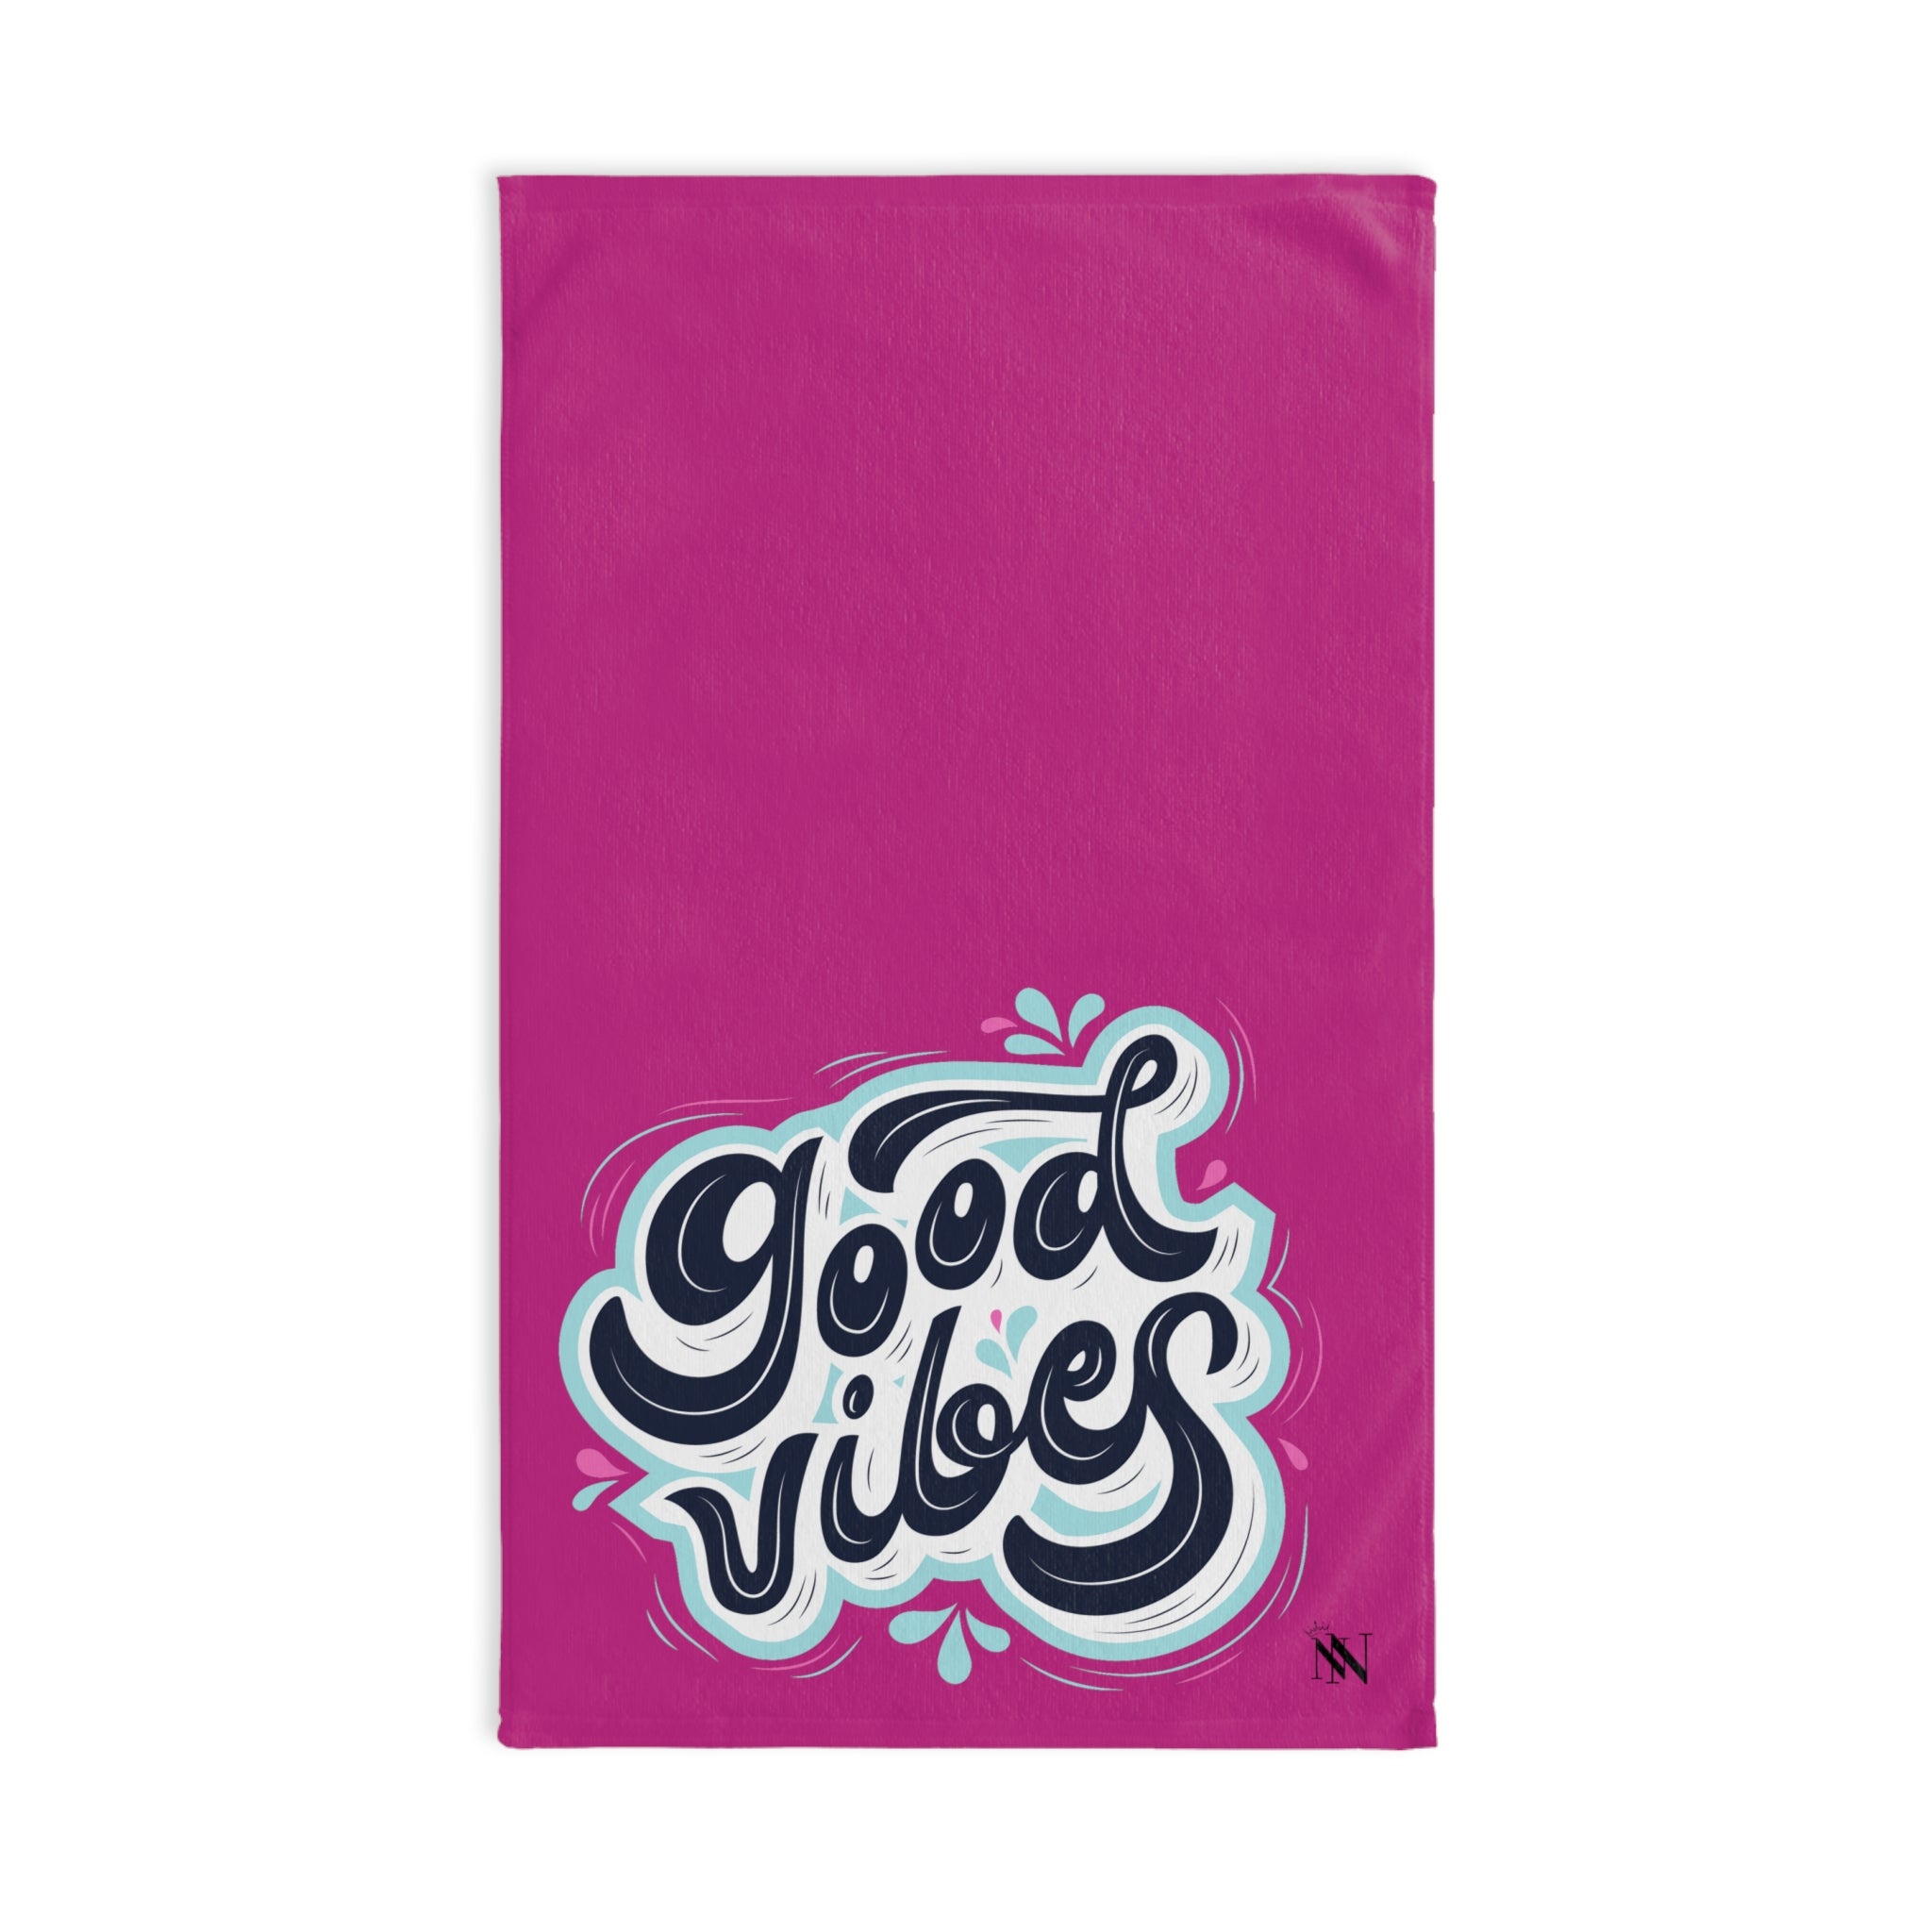 Splash Good Vibes Fuscia | Funny Gifts for Men - Gifts for Him - Birthday Gifts for Men, Him, Husband, Boyfriend, New Couple Gifts, Fathers & Valentines Day Gifts, Hand Towels NECTAR NAPKINS